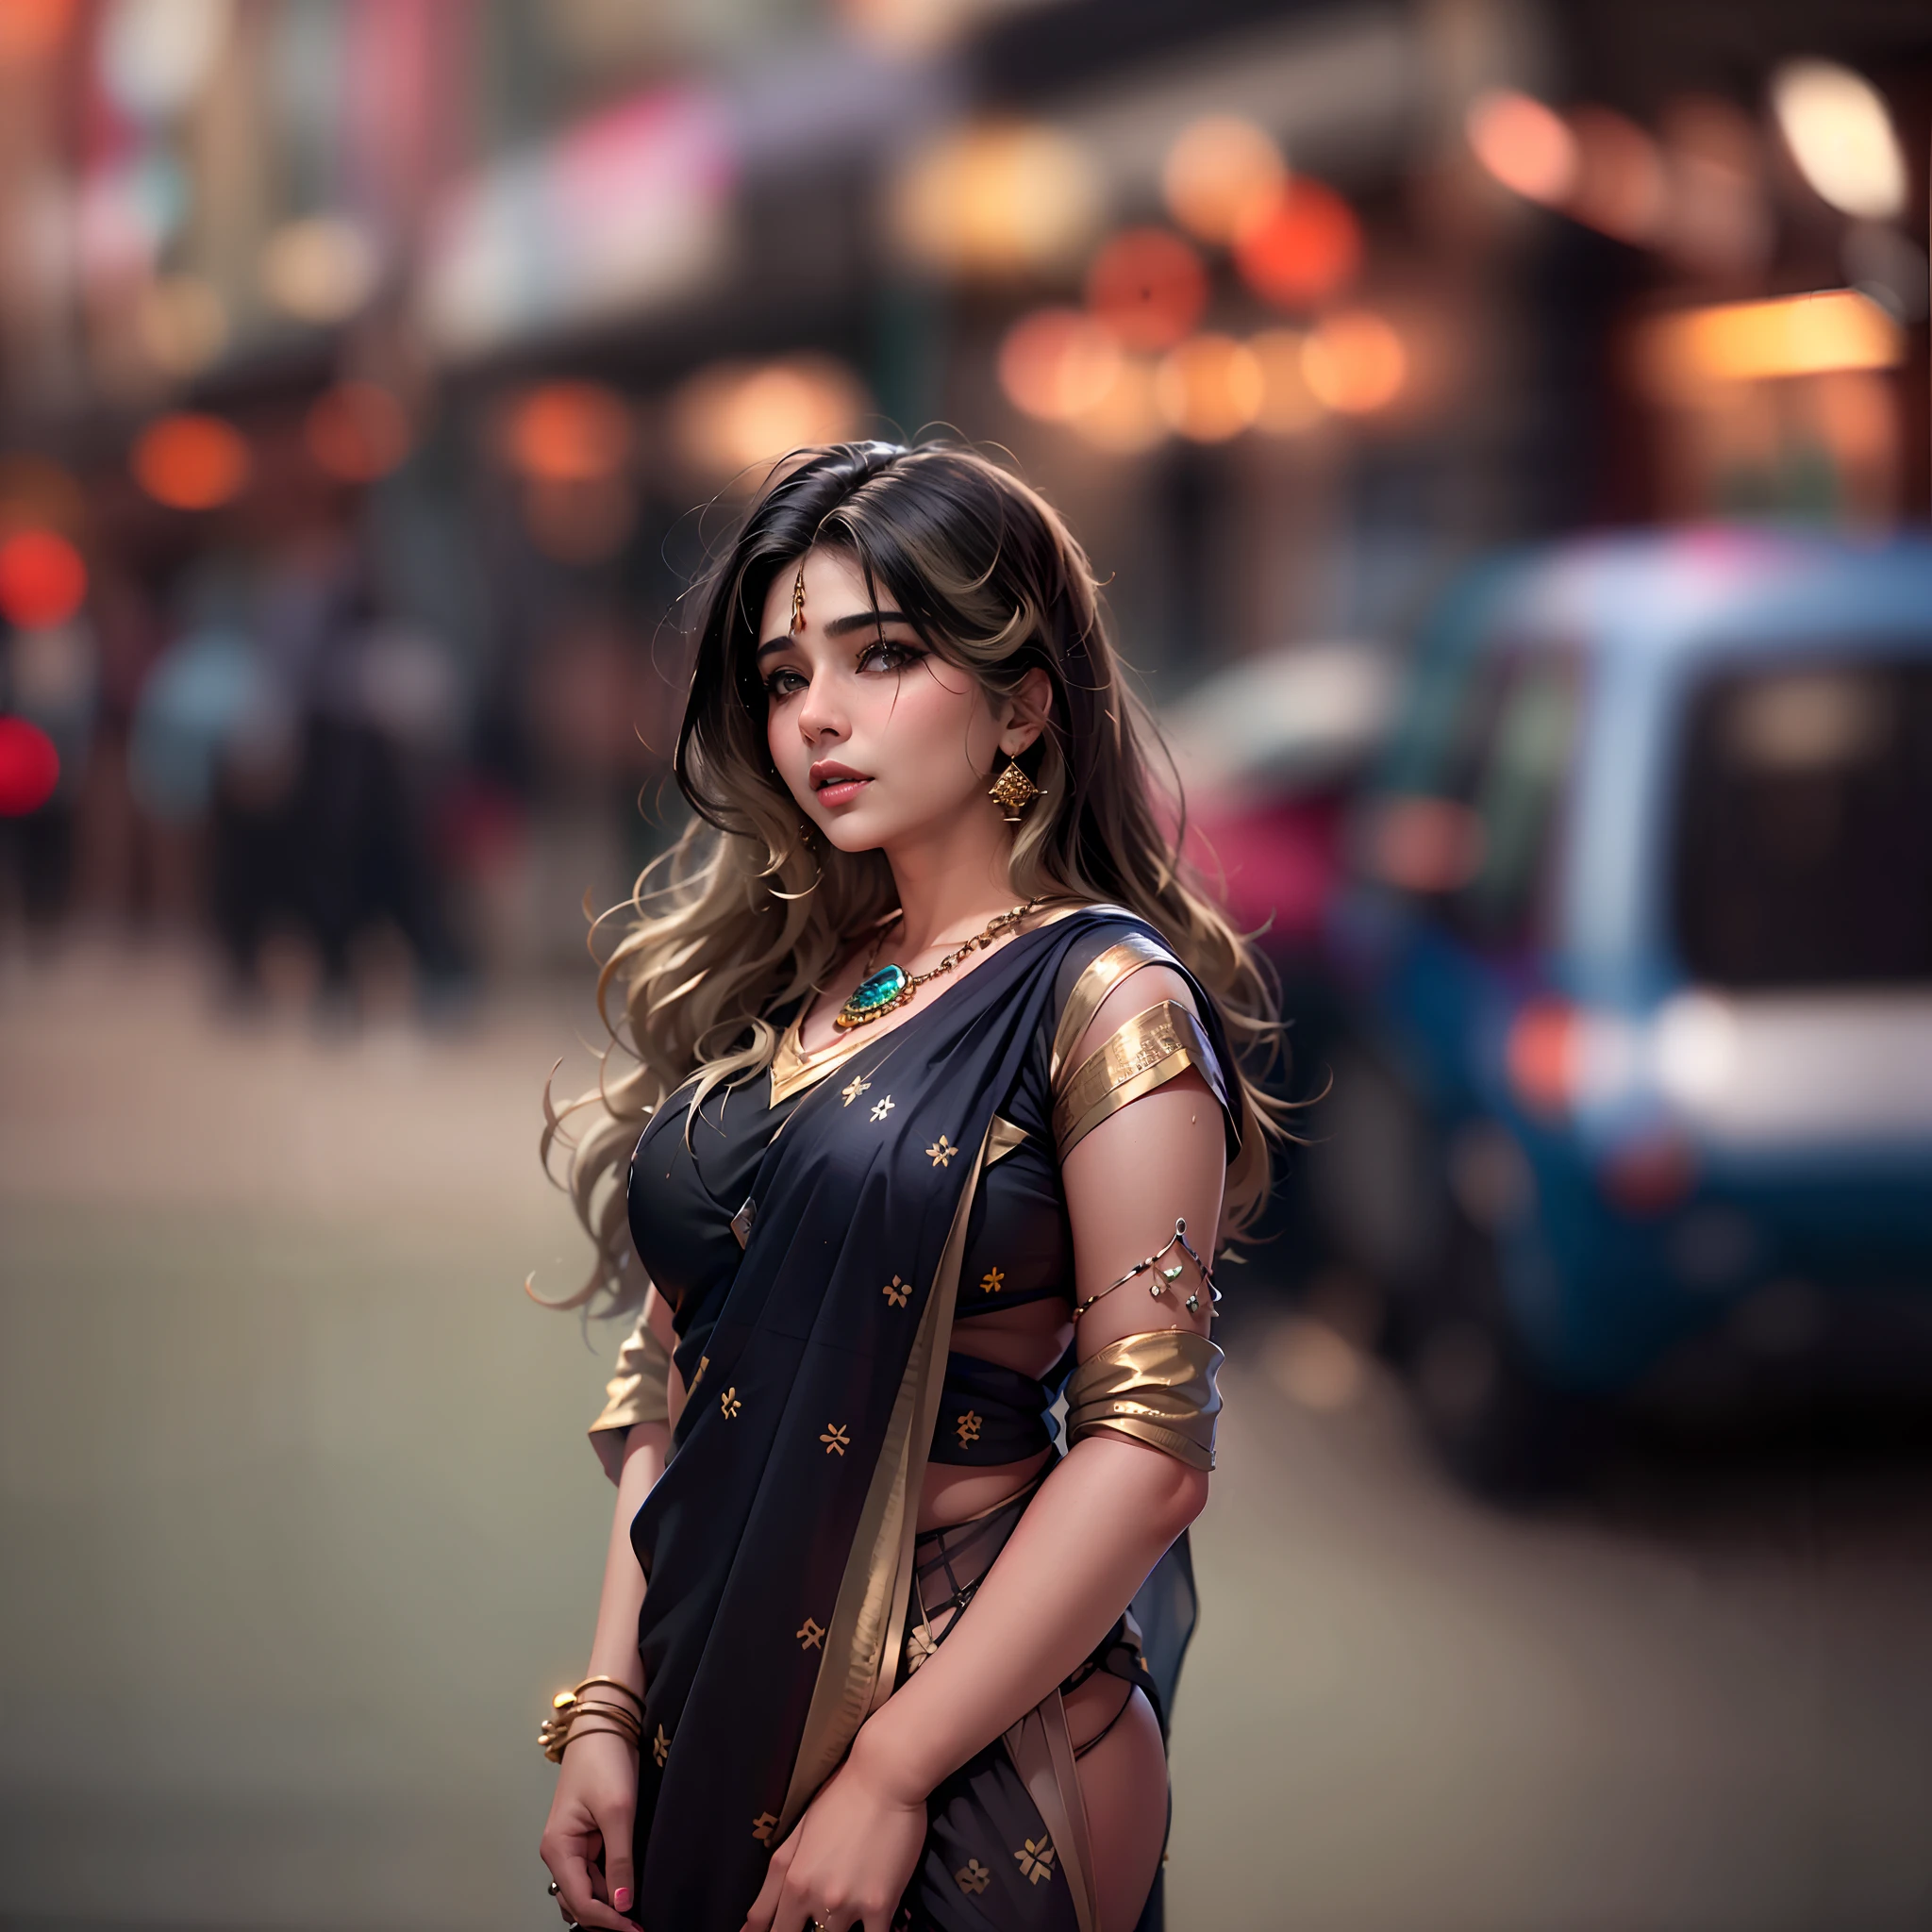 (((desi girl))), chubby face, natural skin, wearing hot deep neck top and dupatta, charming black hair, ((hair ends are blonde)), city streets background, bokeh